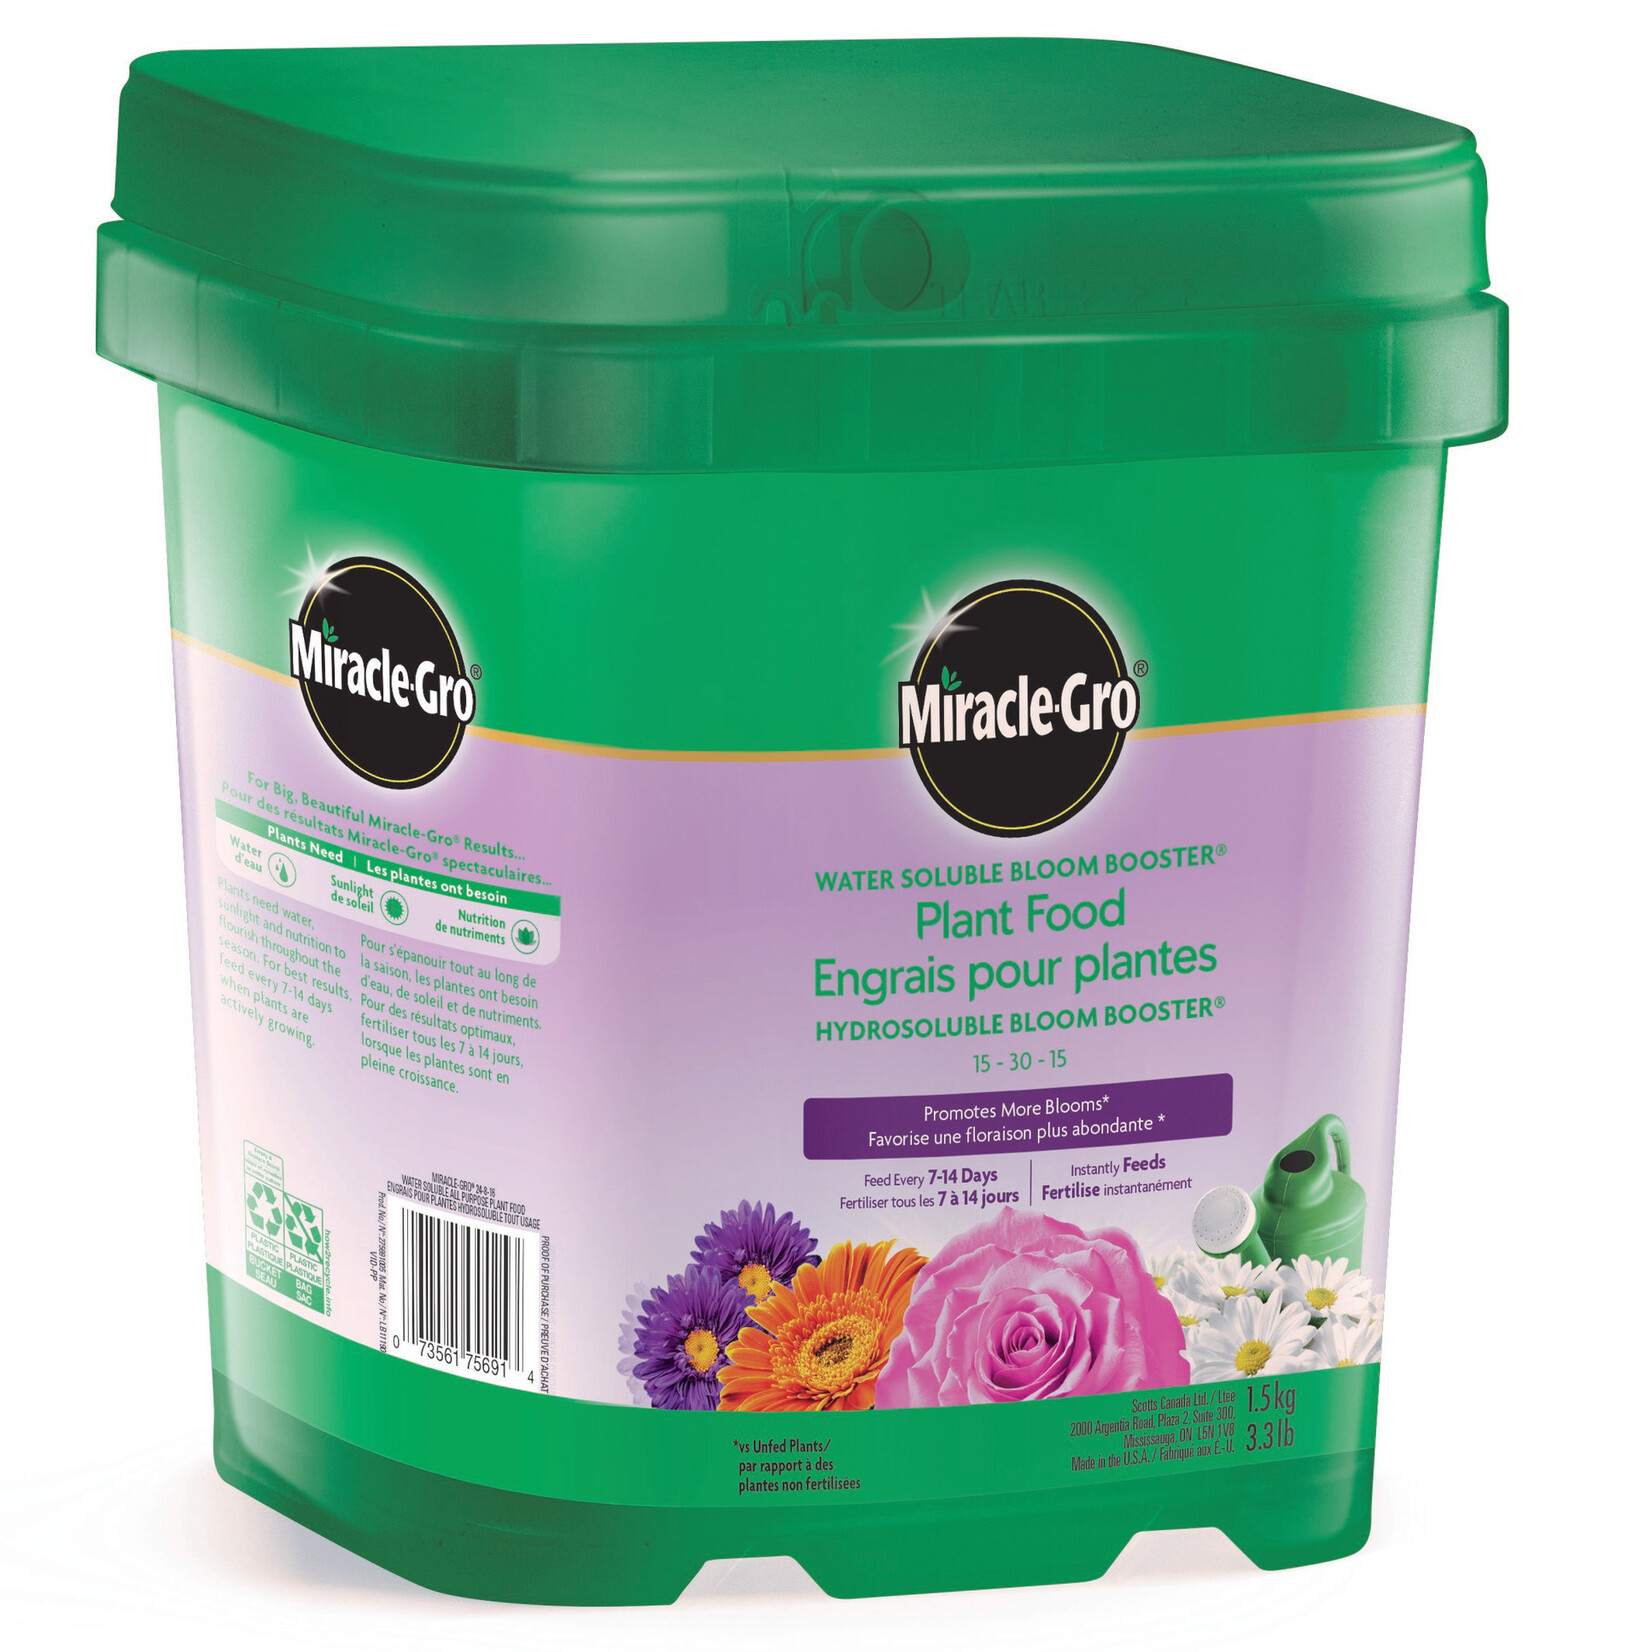 Miracle Gro Miracle-Gro Water Soluble Bloom Booster Plant Food 15-30-15 - 1.5 Kg